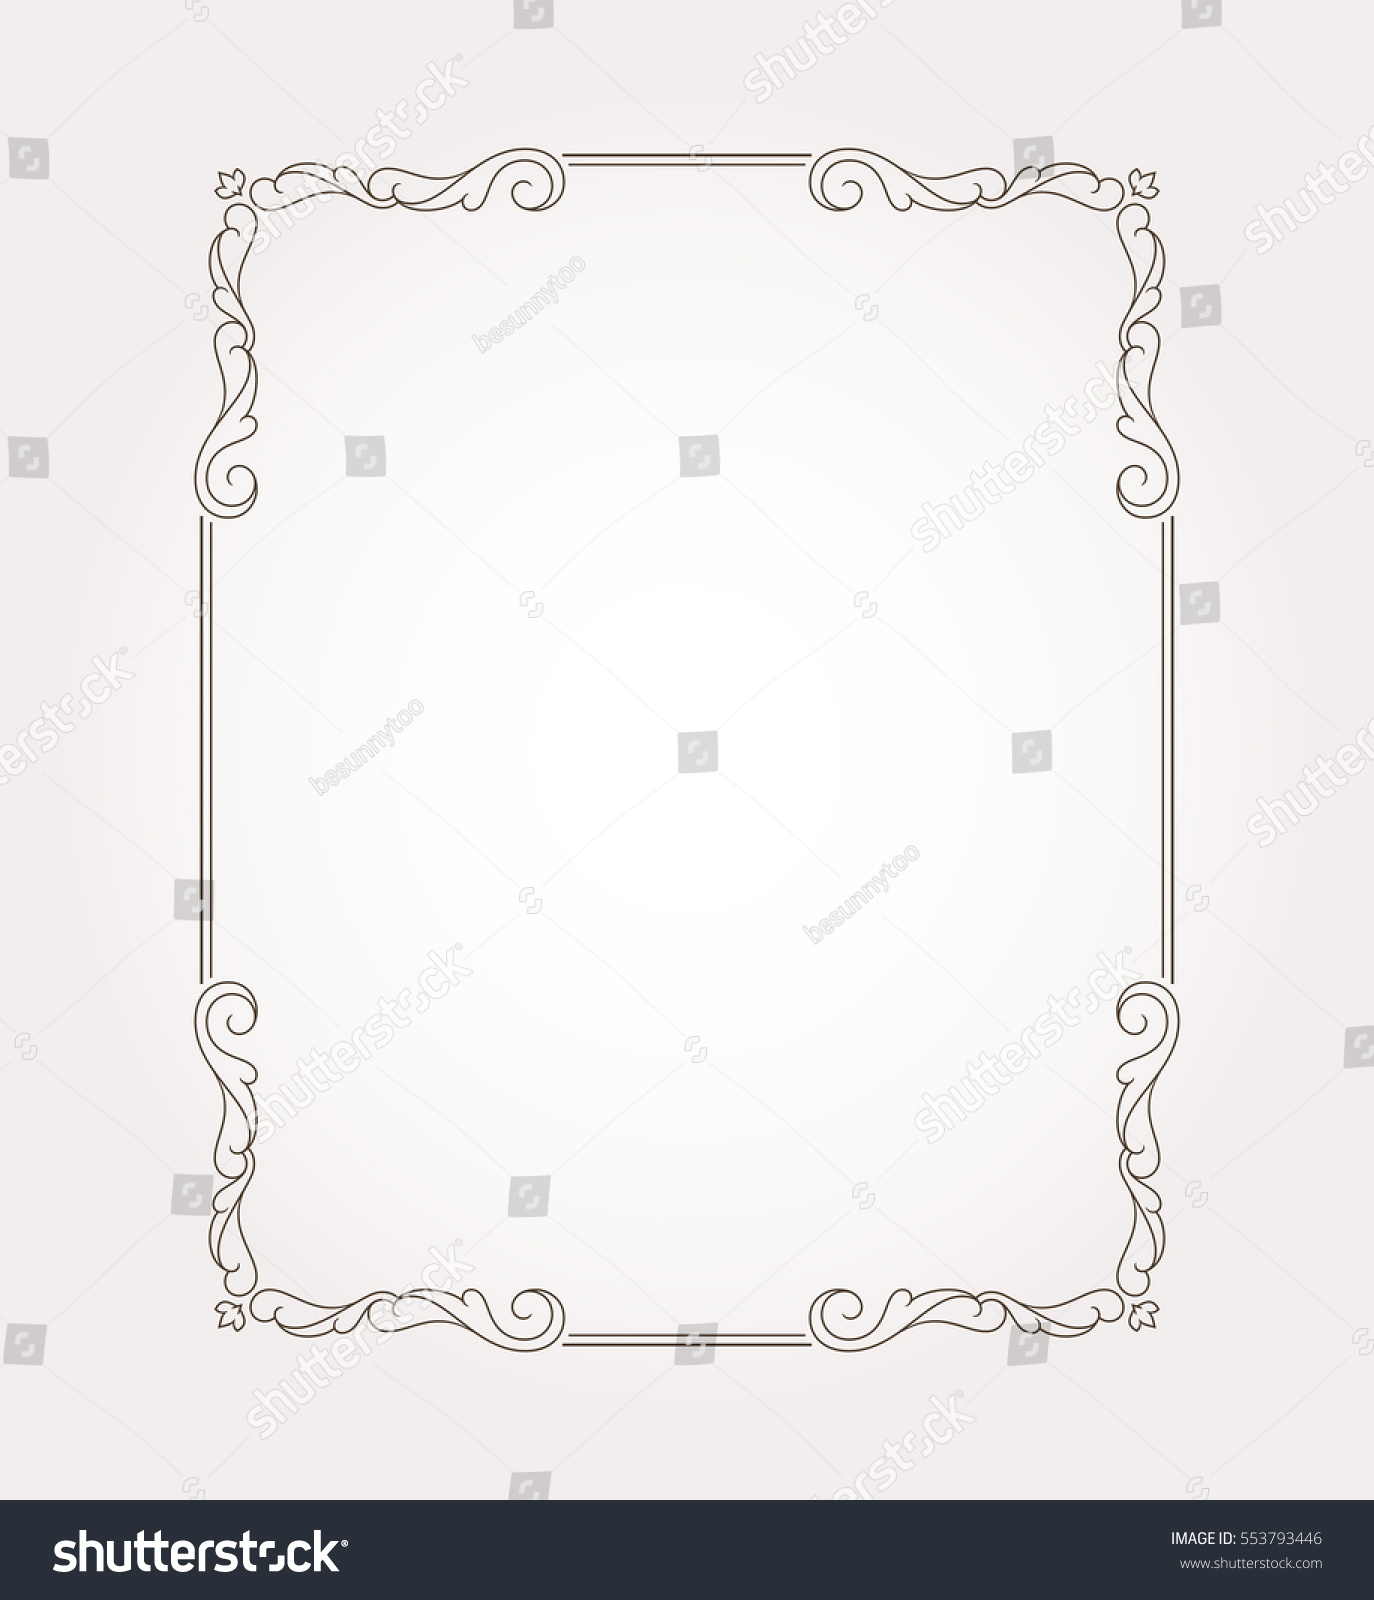 Fancy Frame Border Page Ornament Decorative Stock Vector (Royalty Free ...